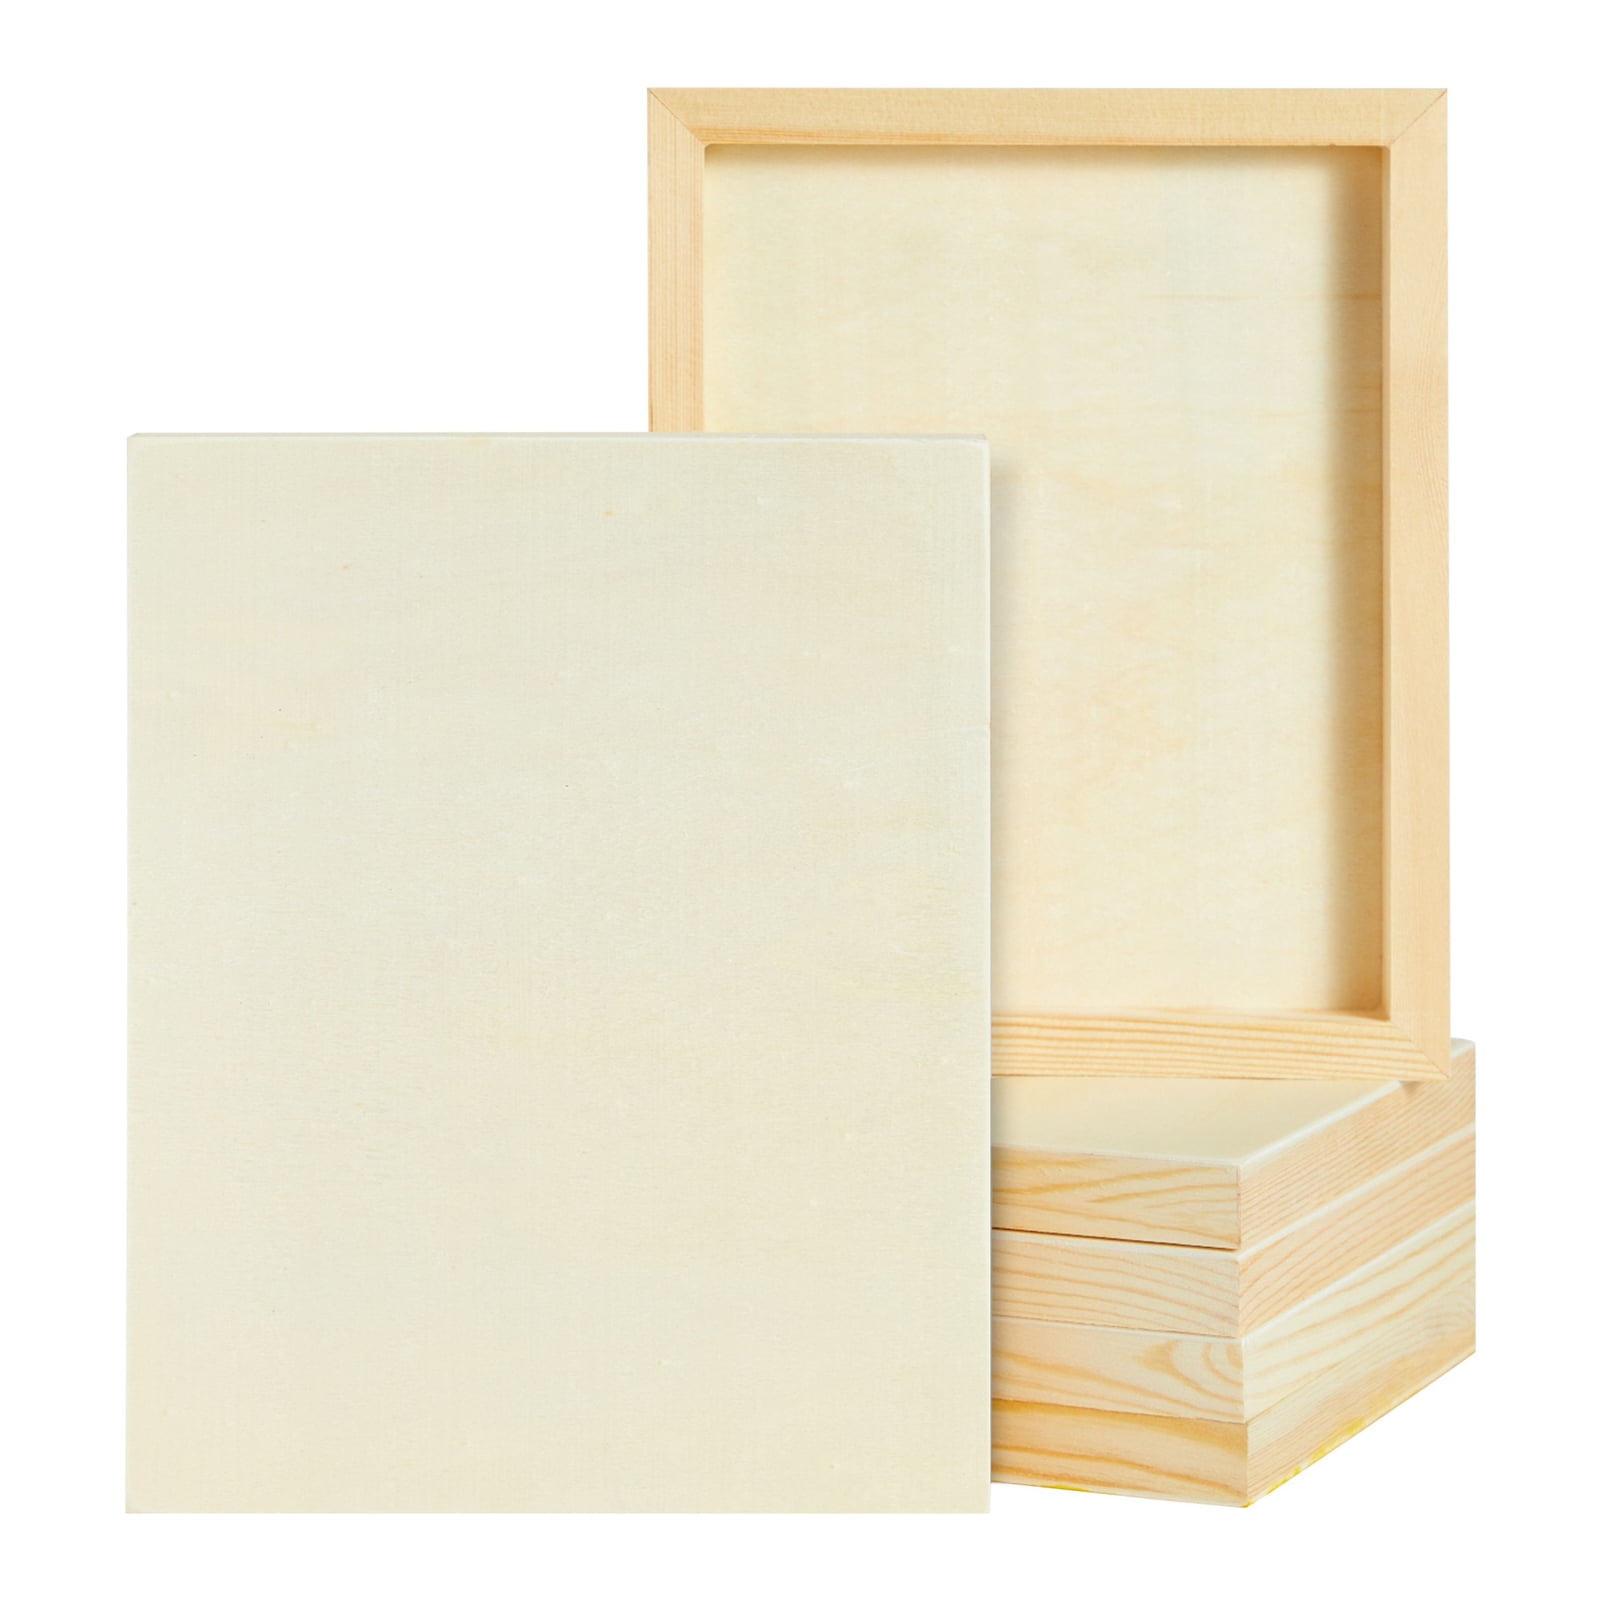 Blank Square Wooden Canvas Cradled Panel Boards for Craft Painting Drawing 8 Pieces Assorted Size Unfinished Wood Canvas